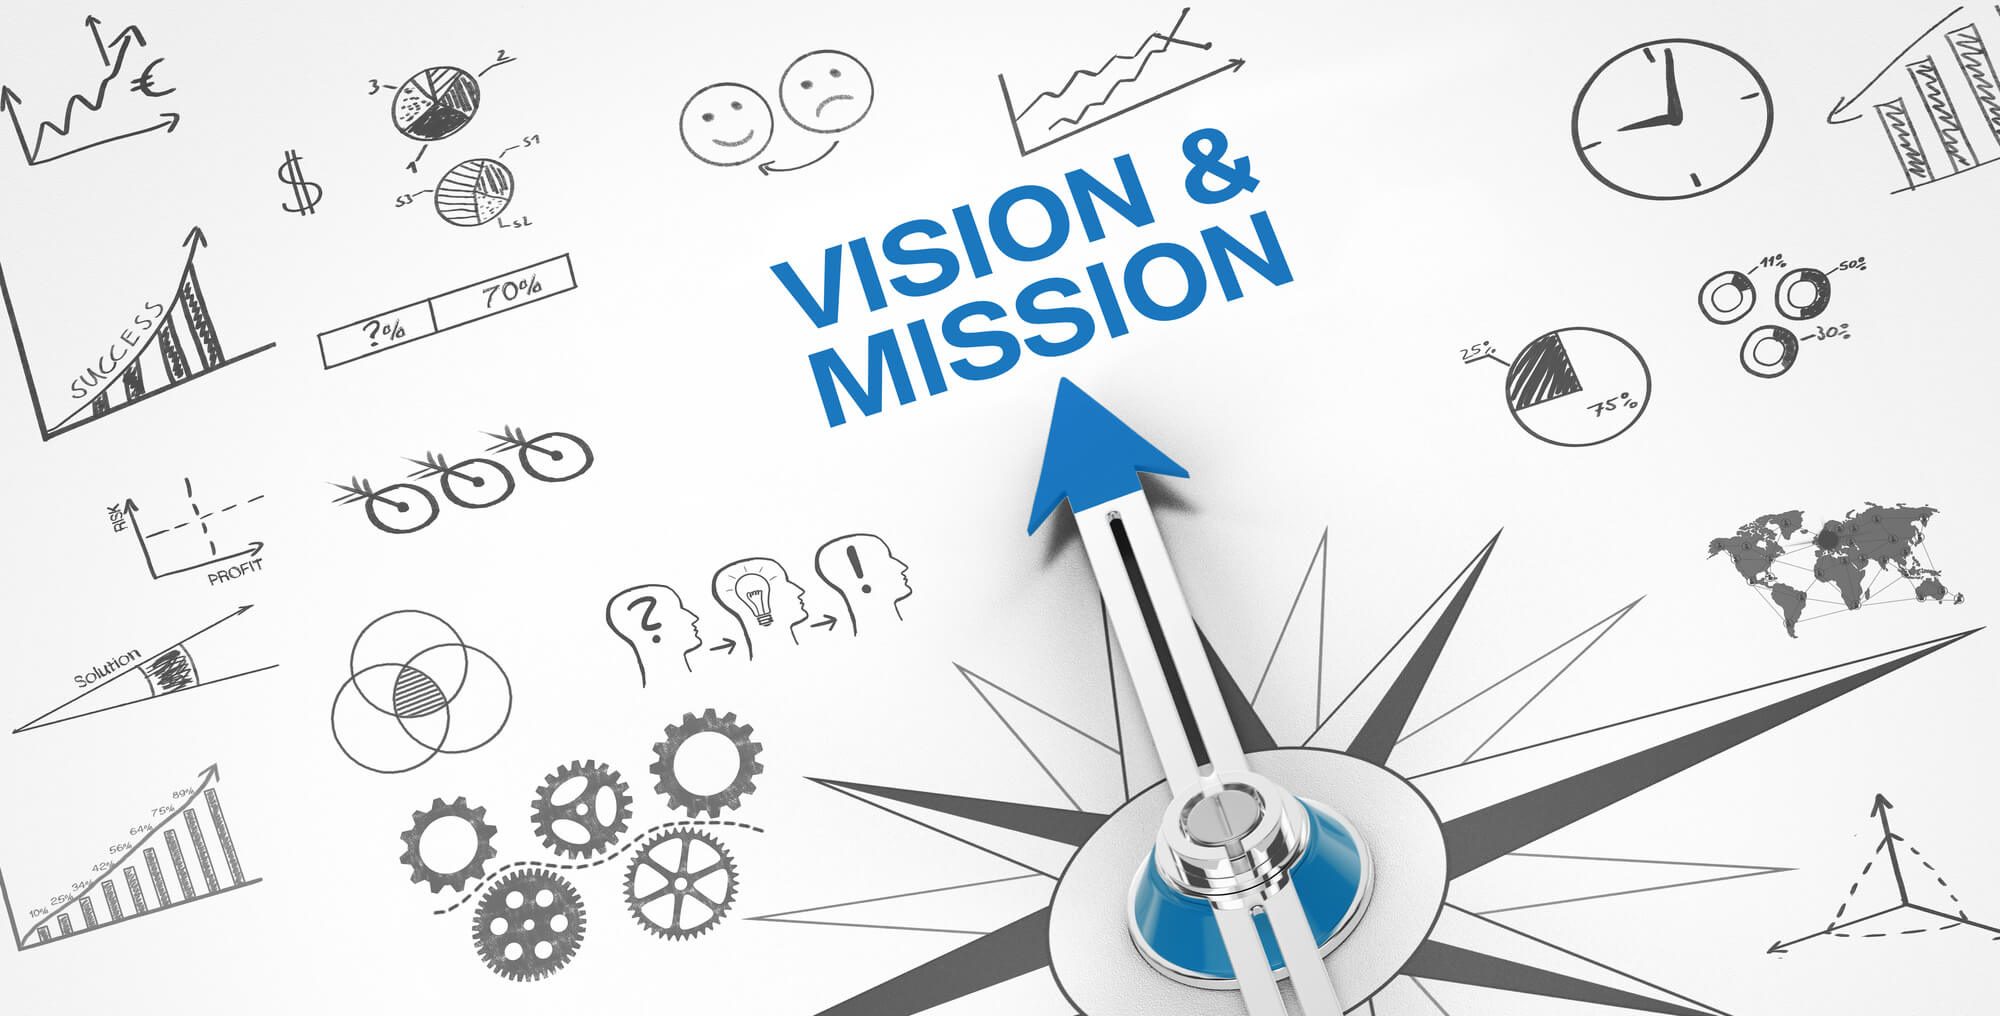 How to Create Your Brand's Vision, Mission, and Values